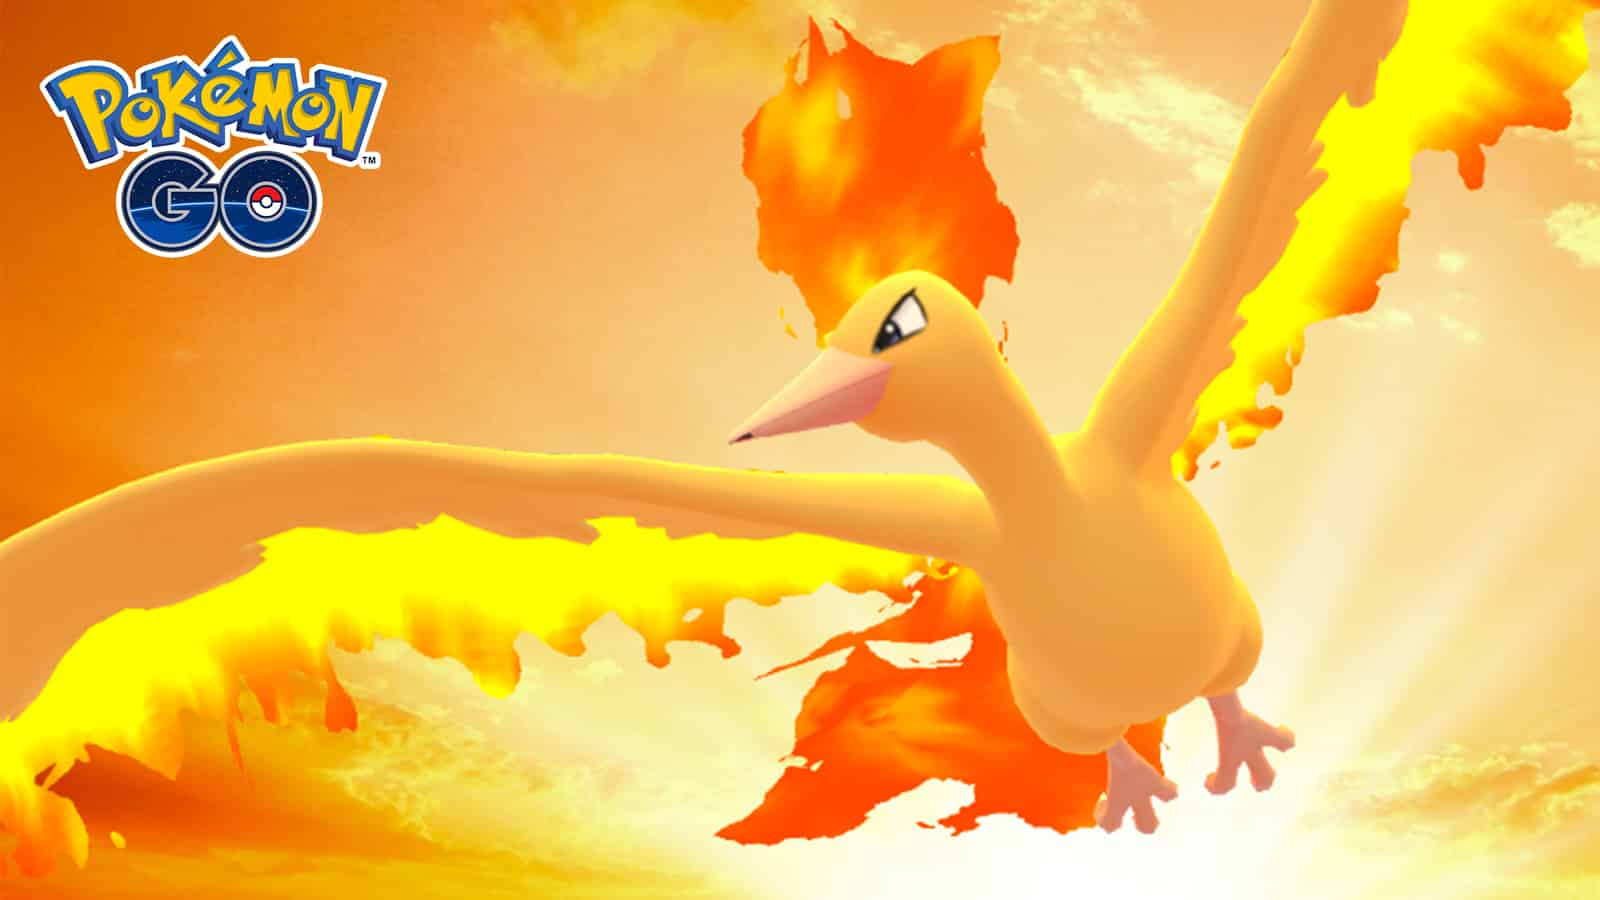 Moltres appearing in Pokemon Go Raid Battles